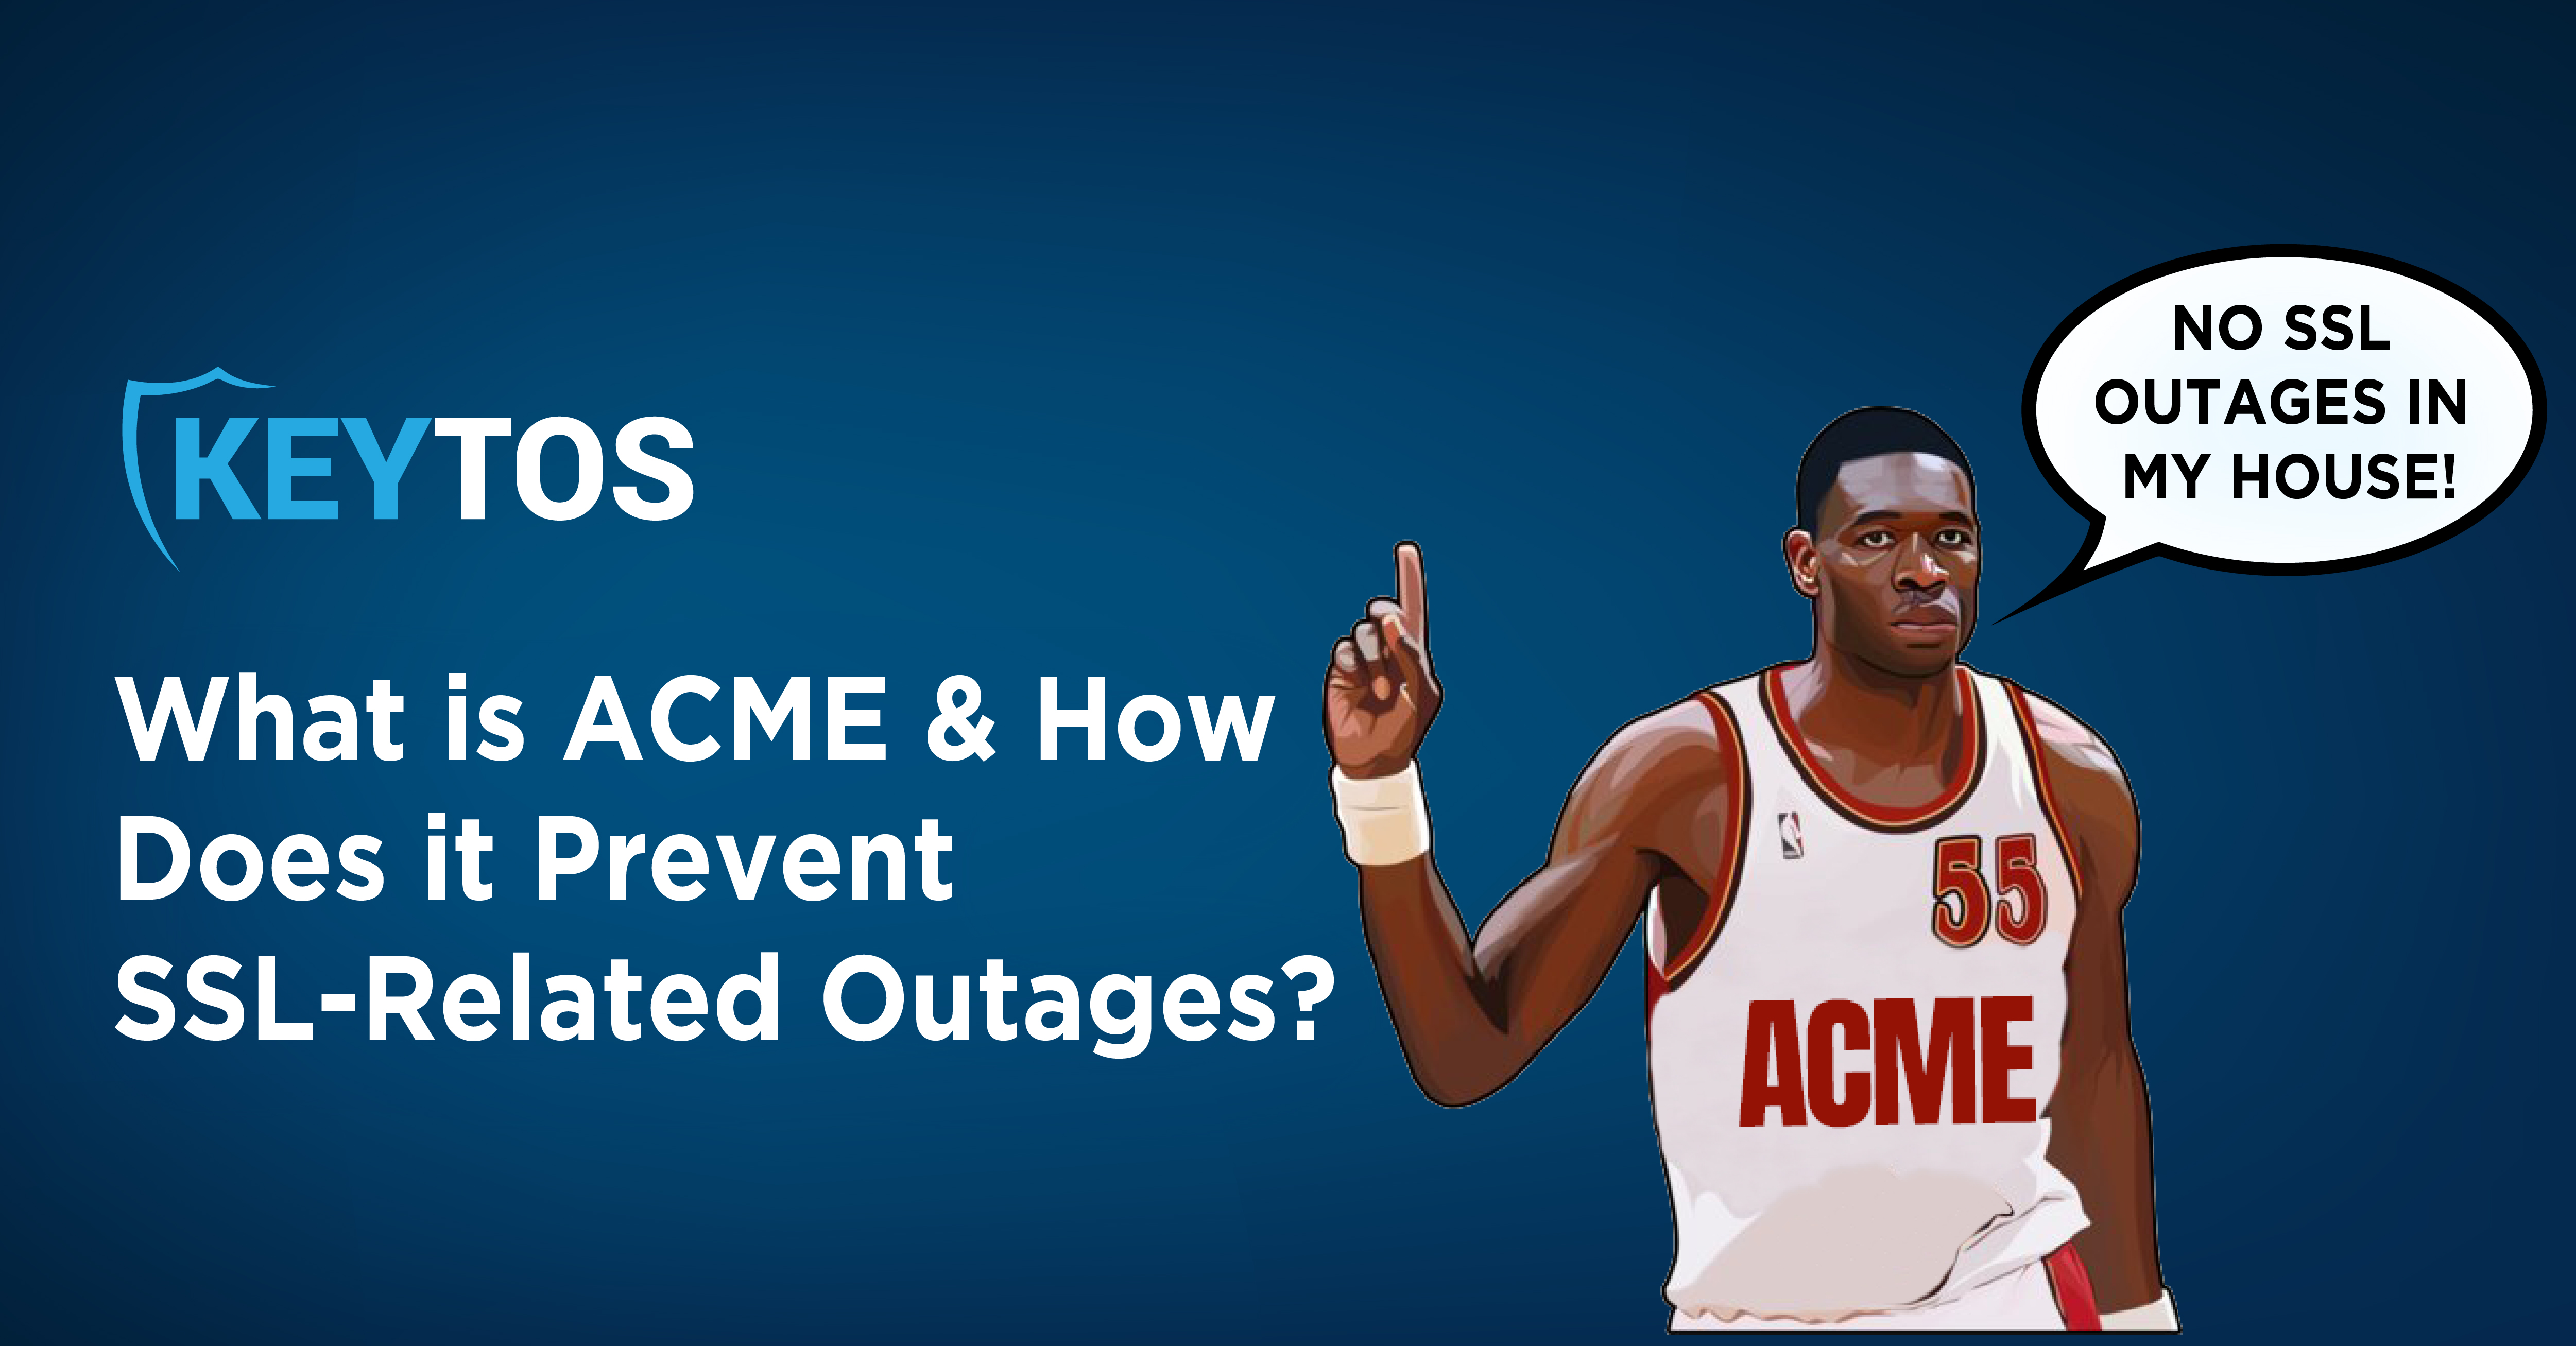 What is ACME? How Does ACME Prevent SSL-Related Outages?